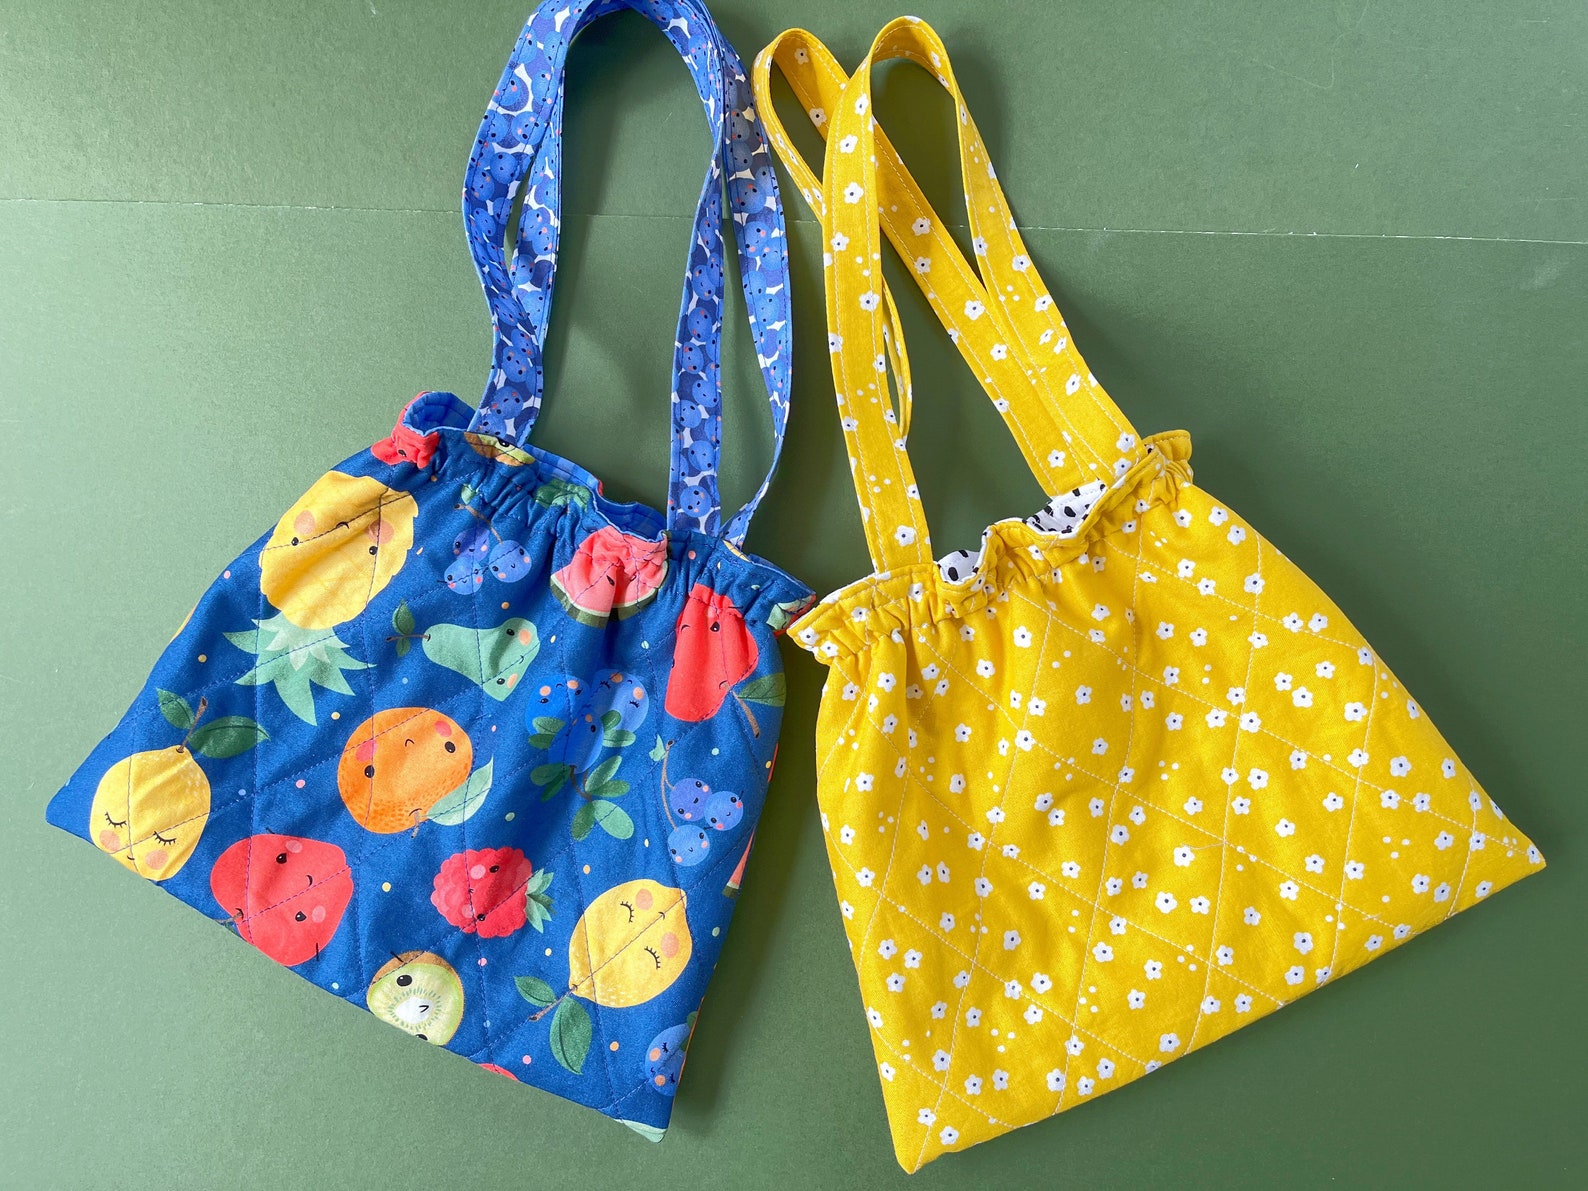 Little Girls Purse Sewing Pattern PDF Tutorial for Quilted - Etsy